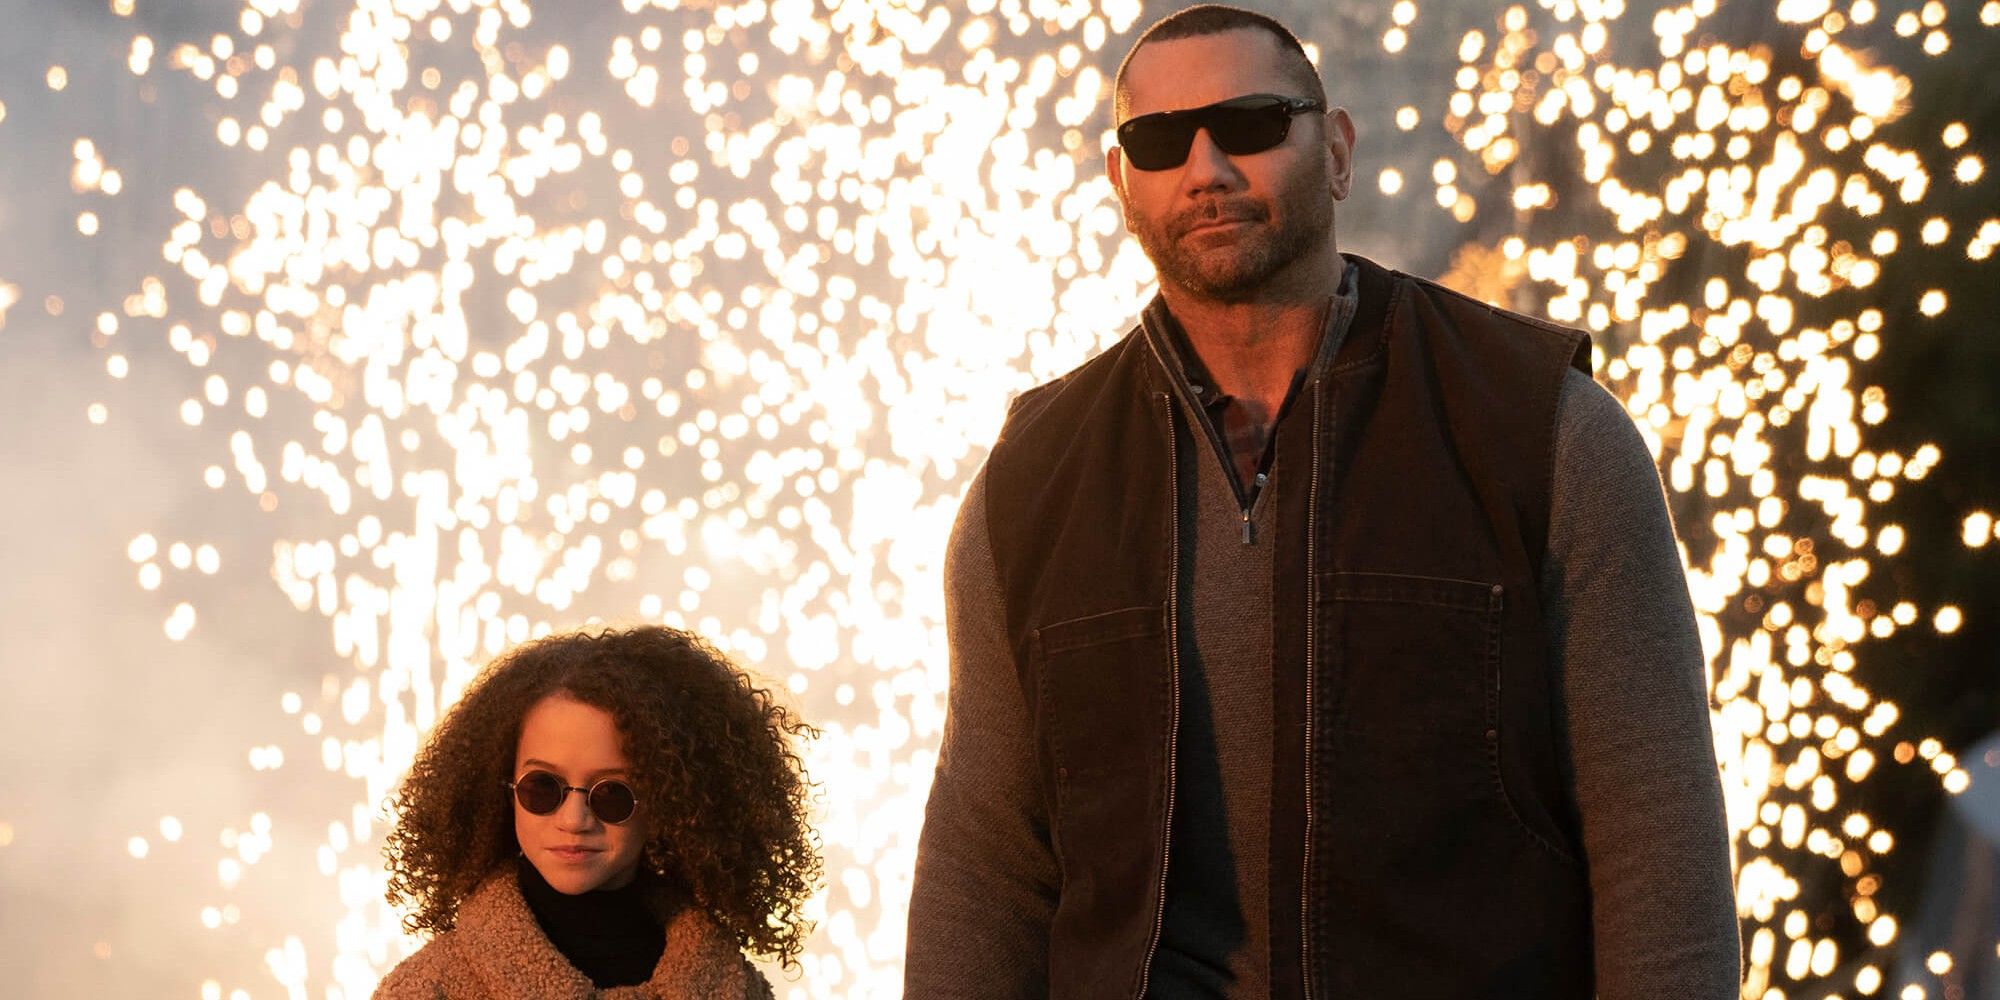 Chloe Coleman and Dave Bautista in My Spy wearing sunglasses